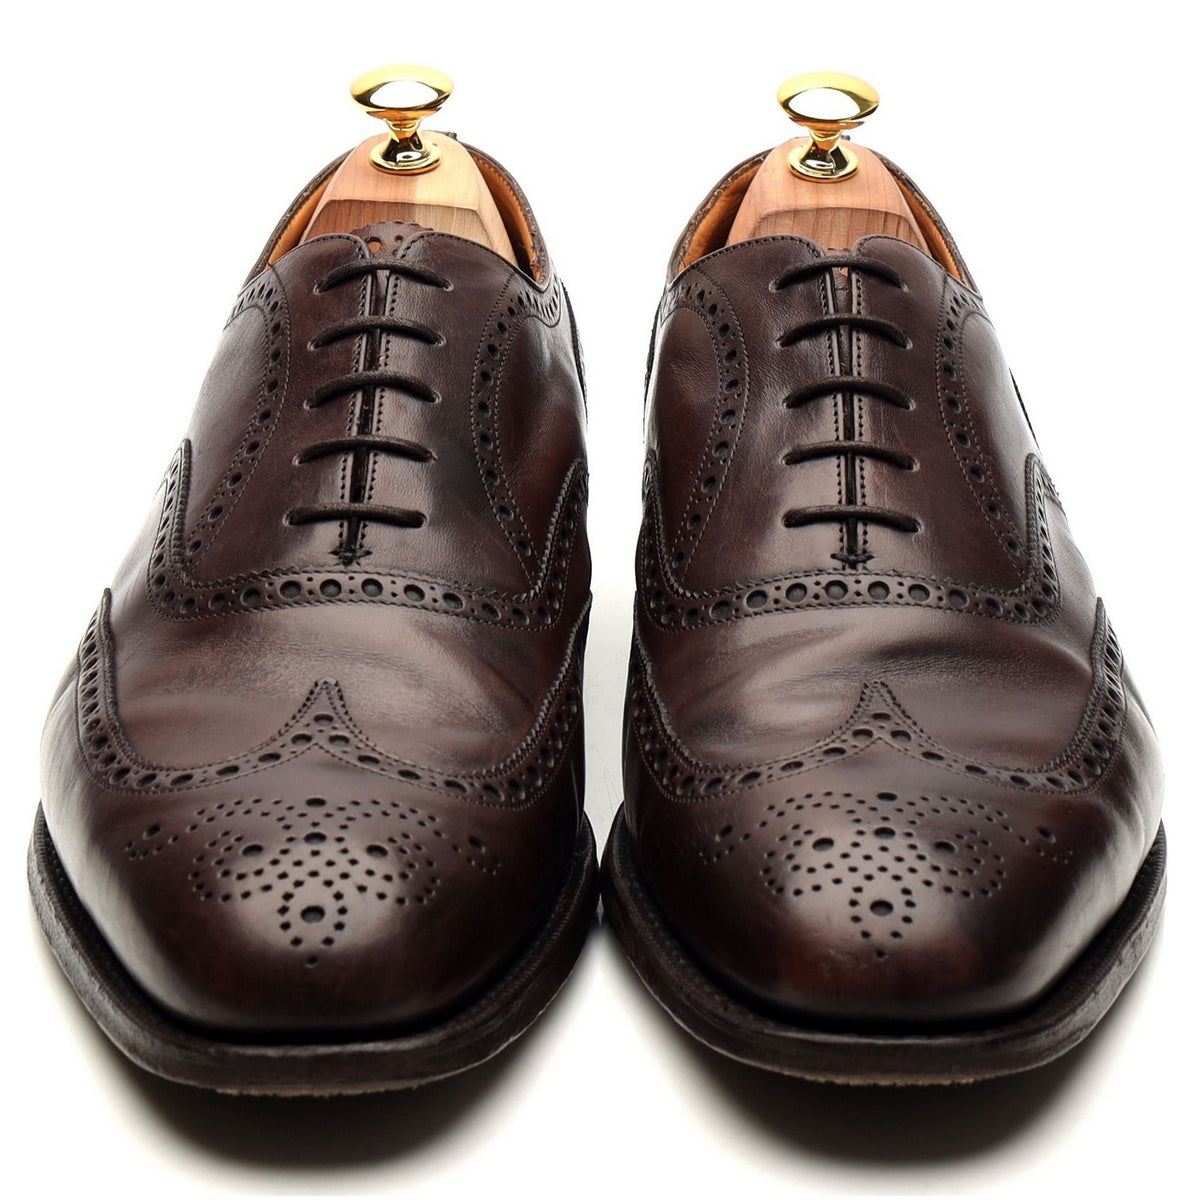 &#39;Chetwynd&#39; Dark Brown Leather Oxford Brogues UK 10.5 G